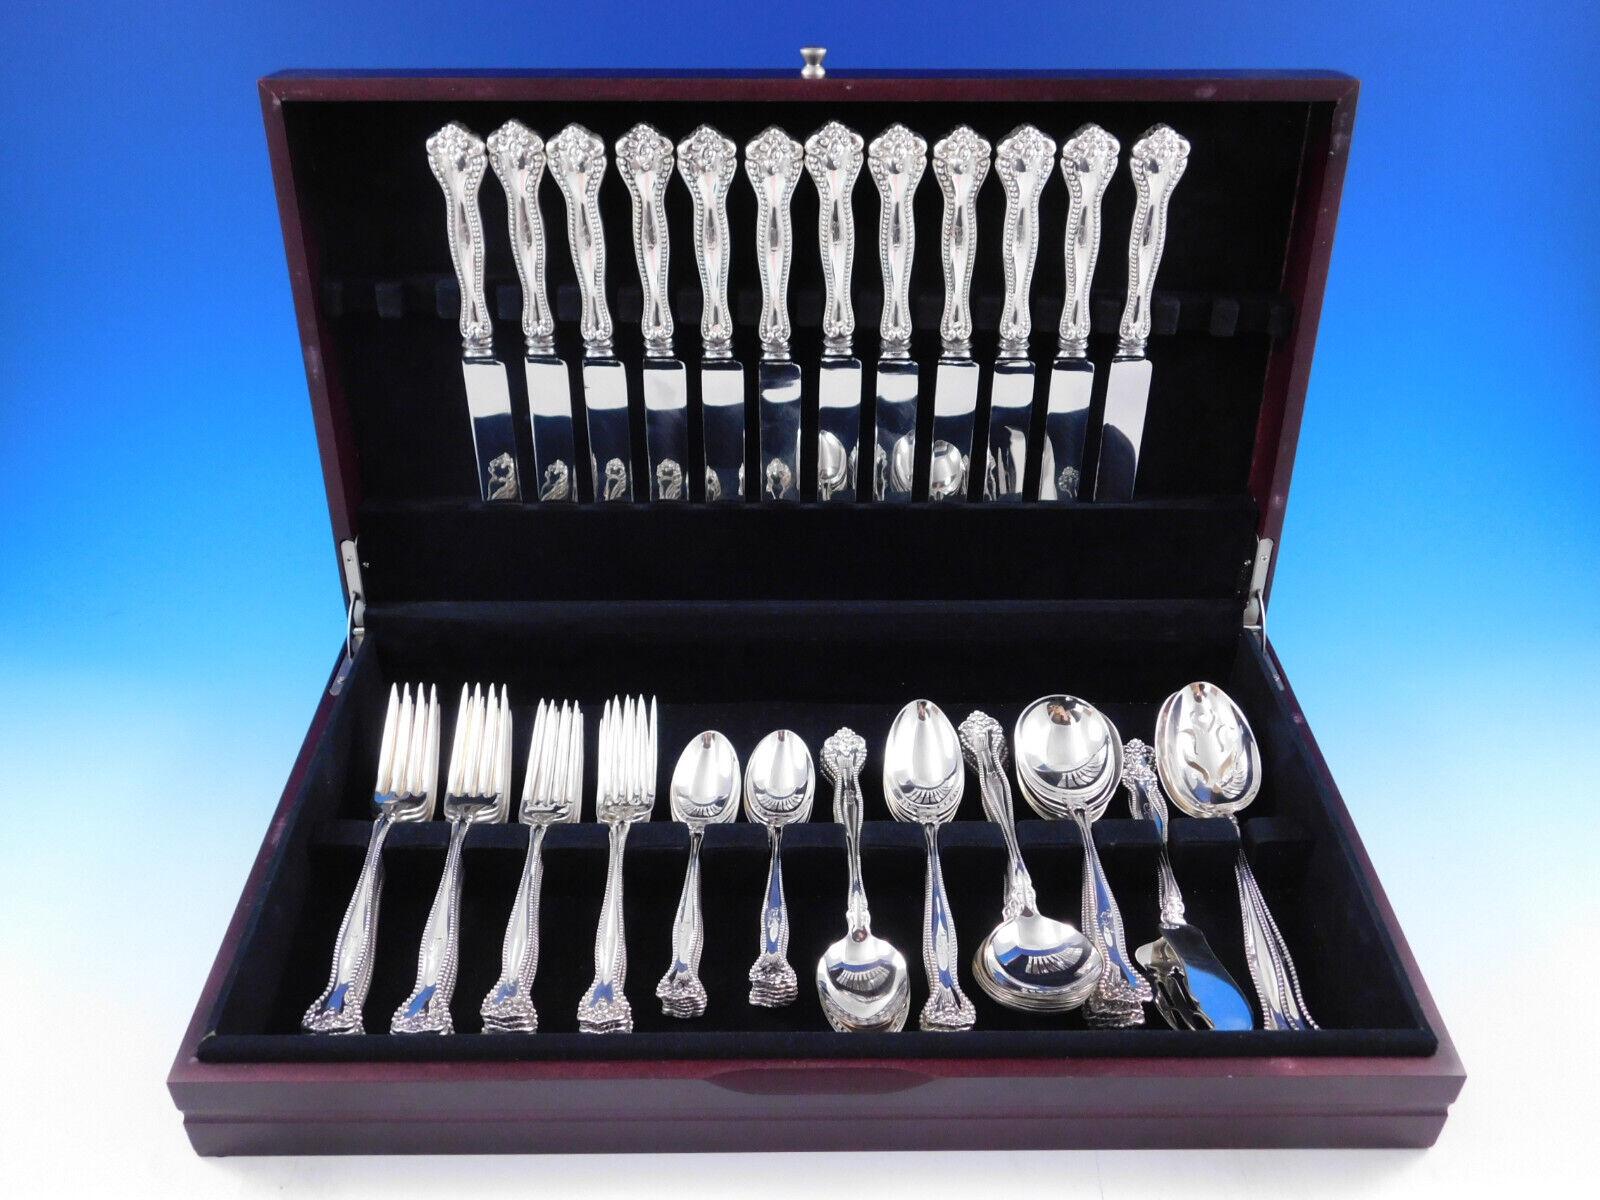 Rare Dinner Size Raleigh by Alvin c1900 sterling silver flatware set - 76 pieces. This set includes:

12 Dinner Knives w/blunt stainless blades, 9 5/8